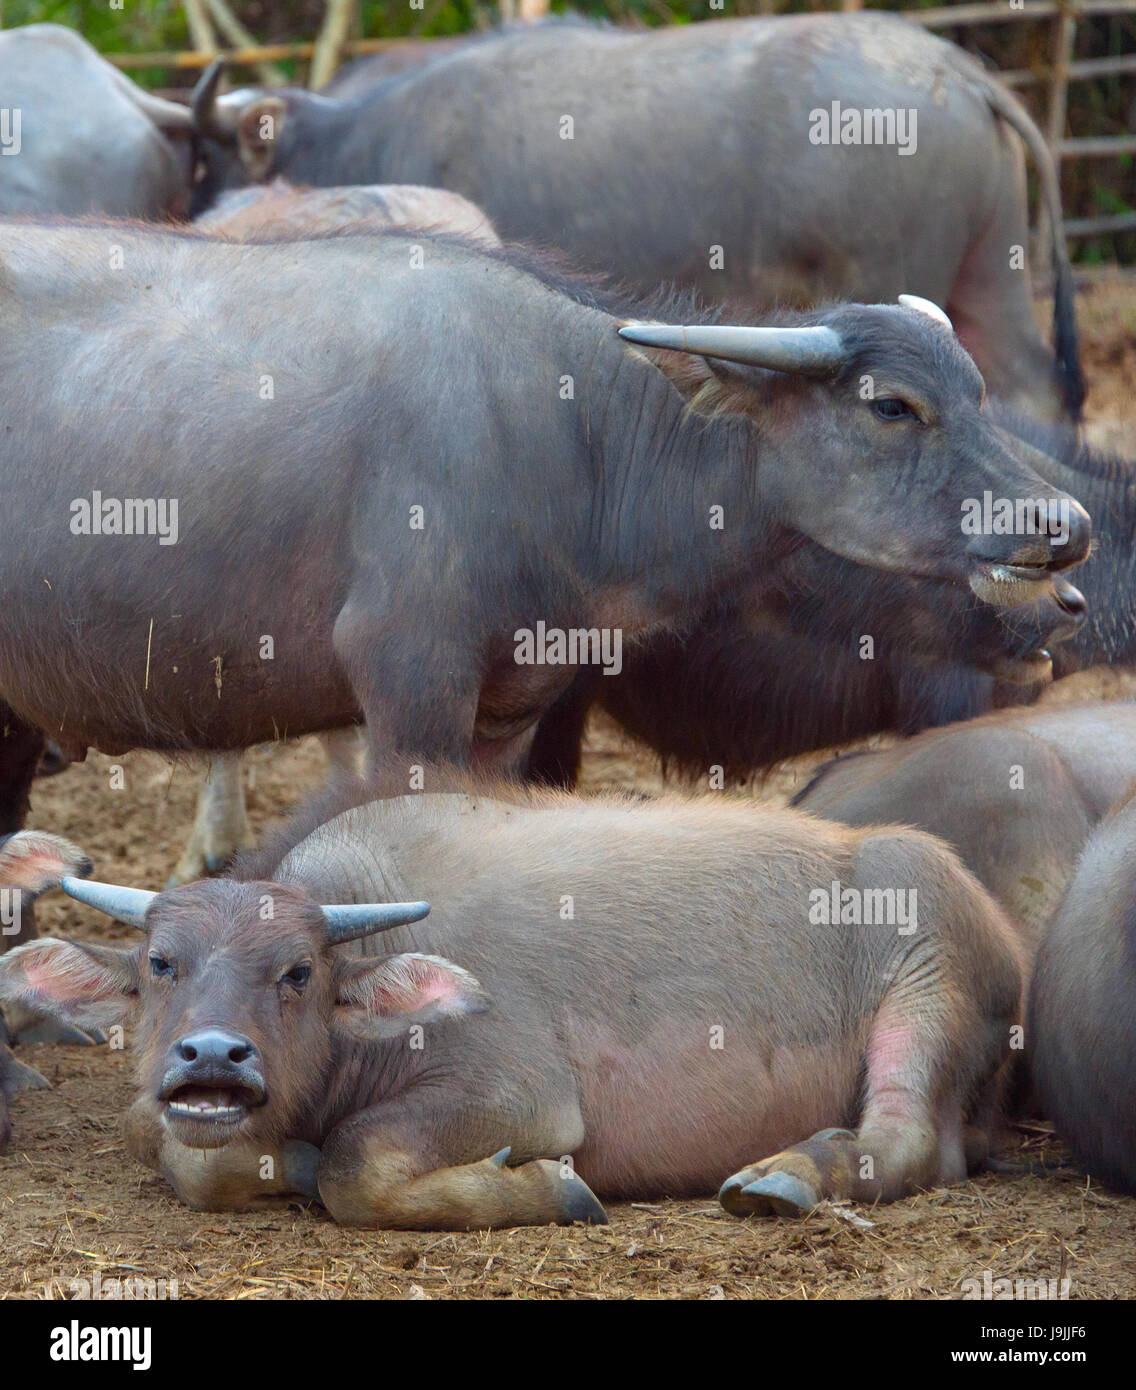 VIiew of a herd of buffalo at a farm. Thailand Stock Photo